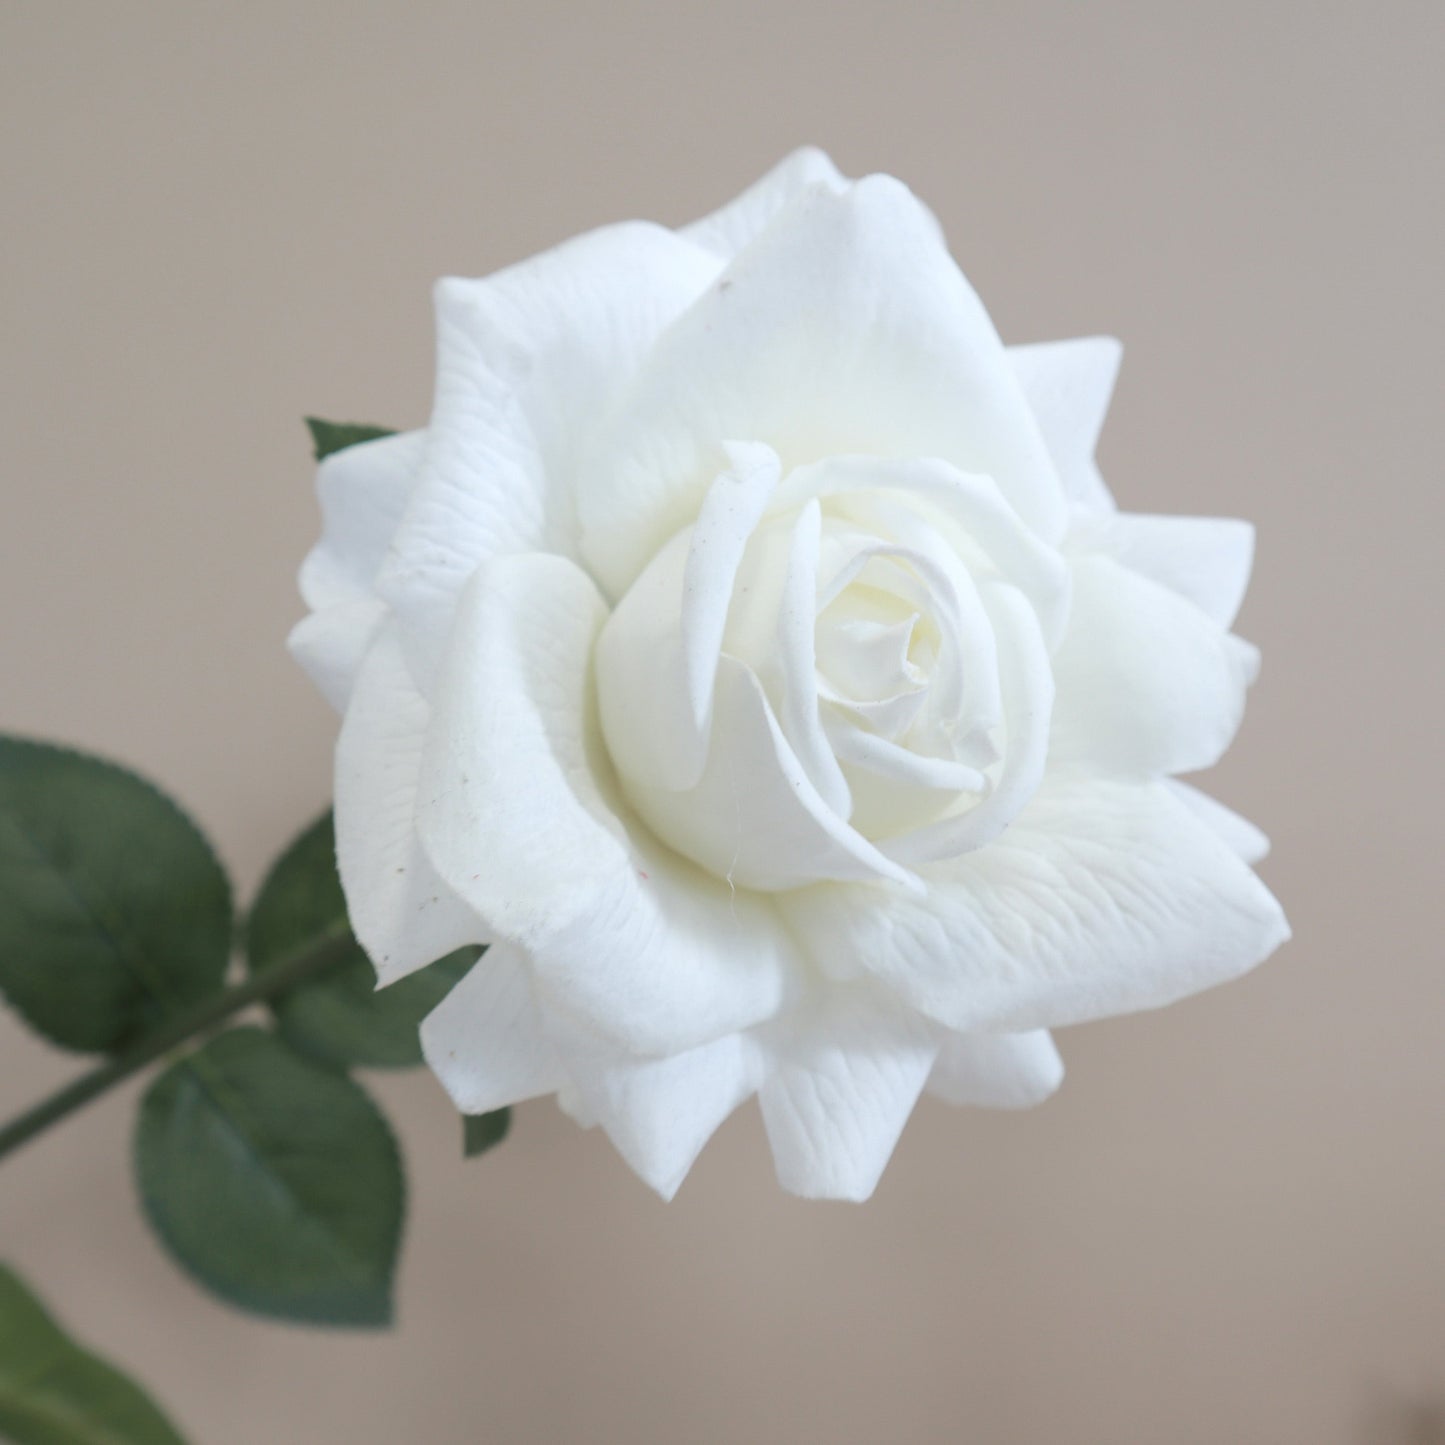 10 of Artificial Real Touch Rose White